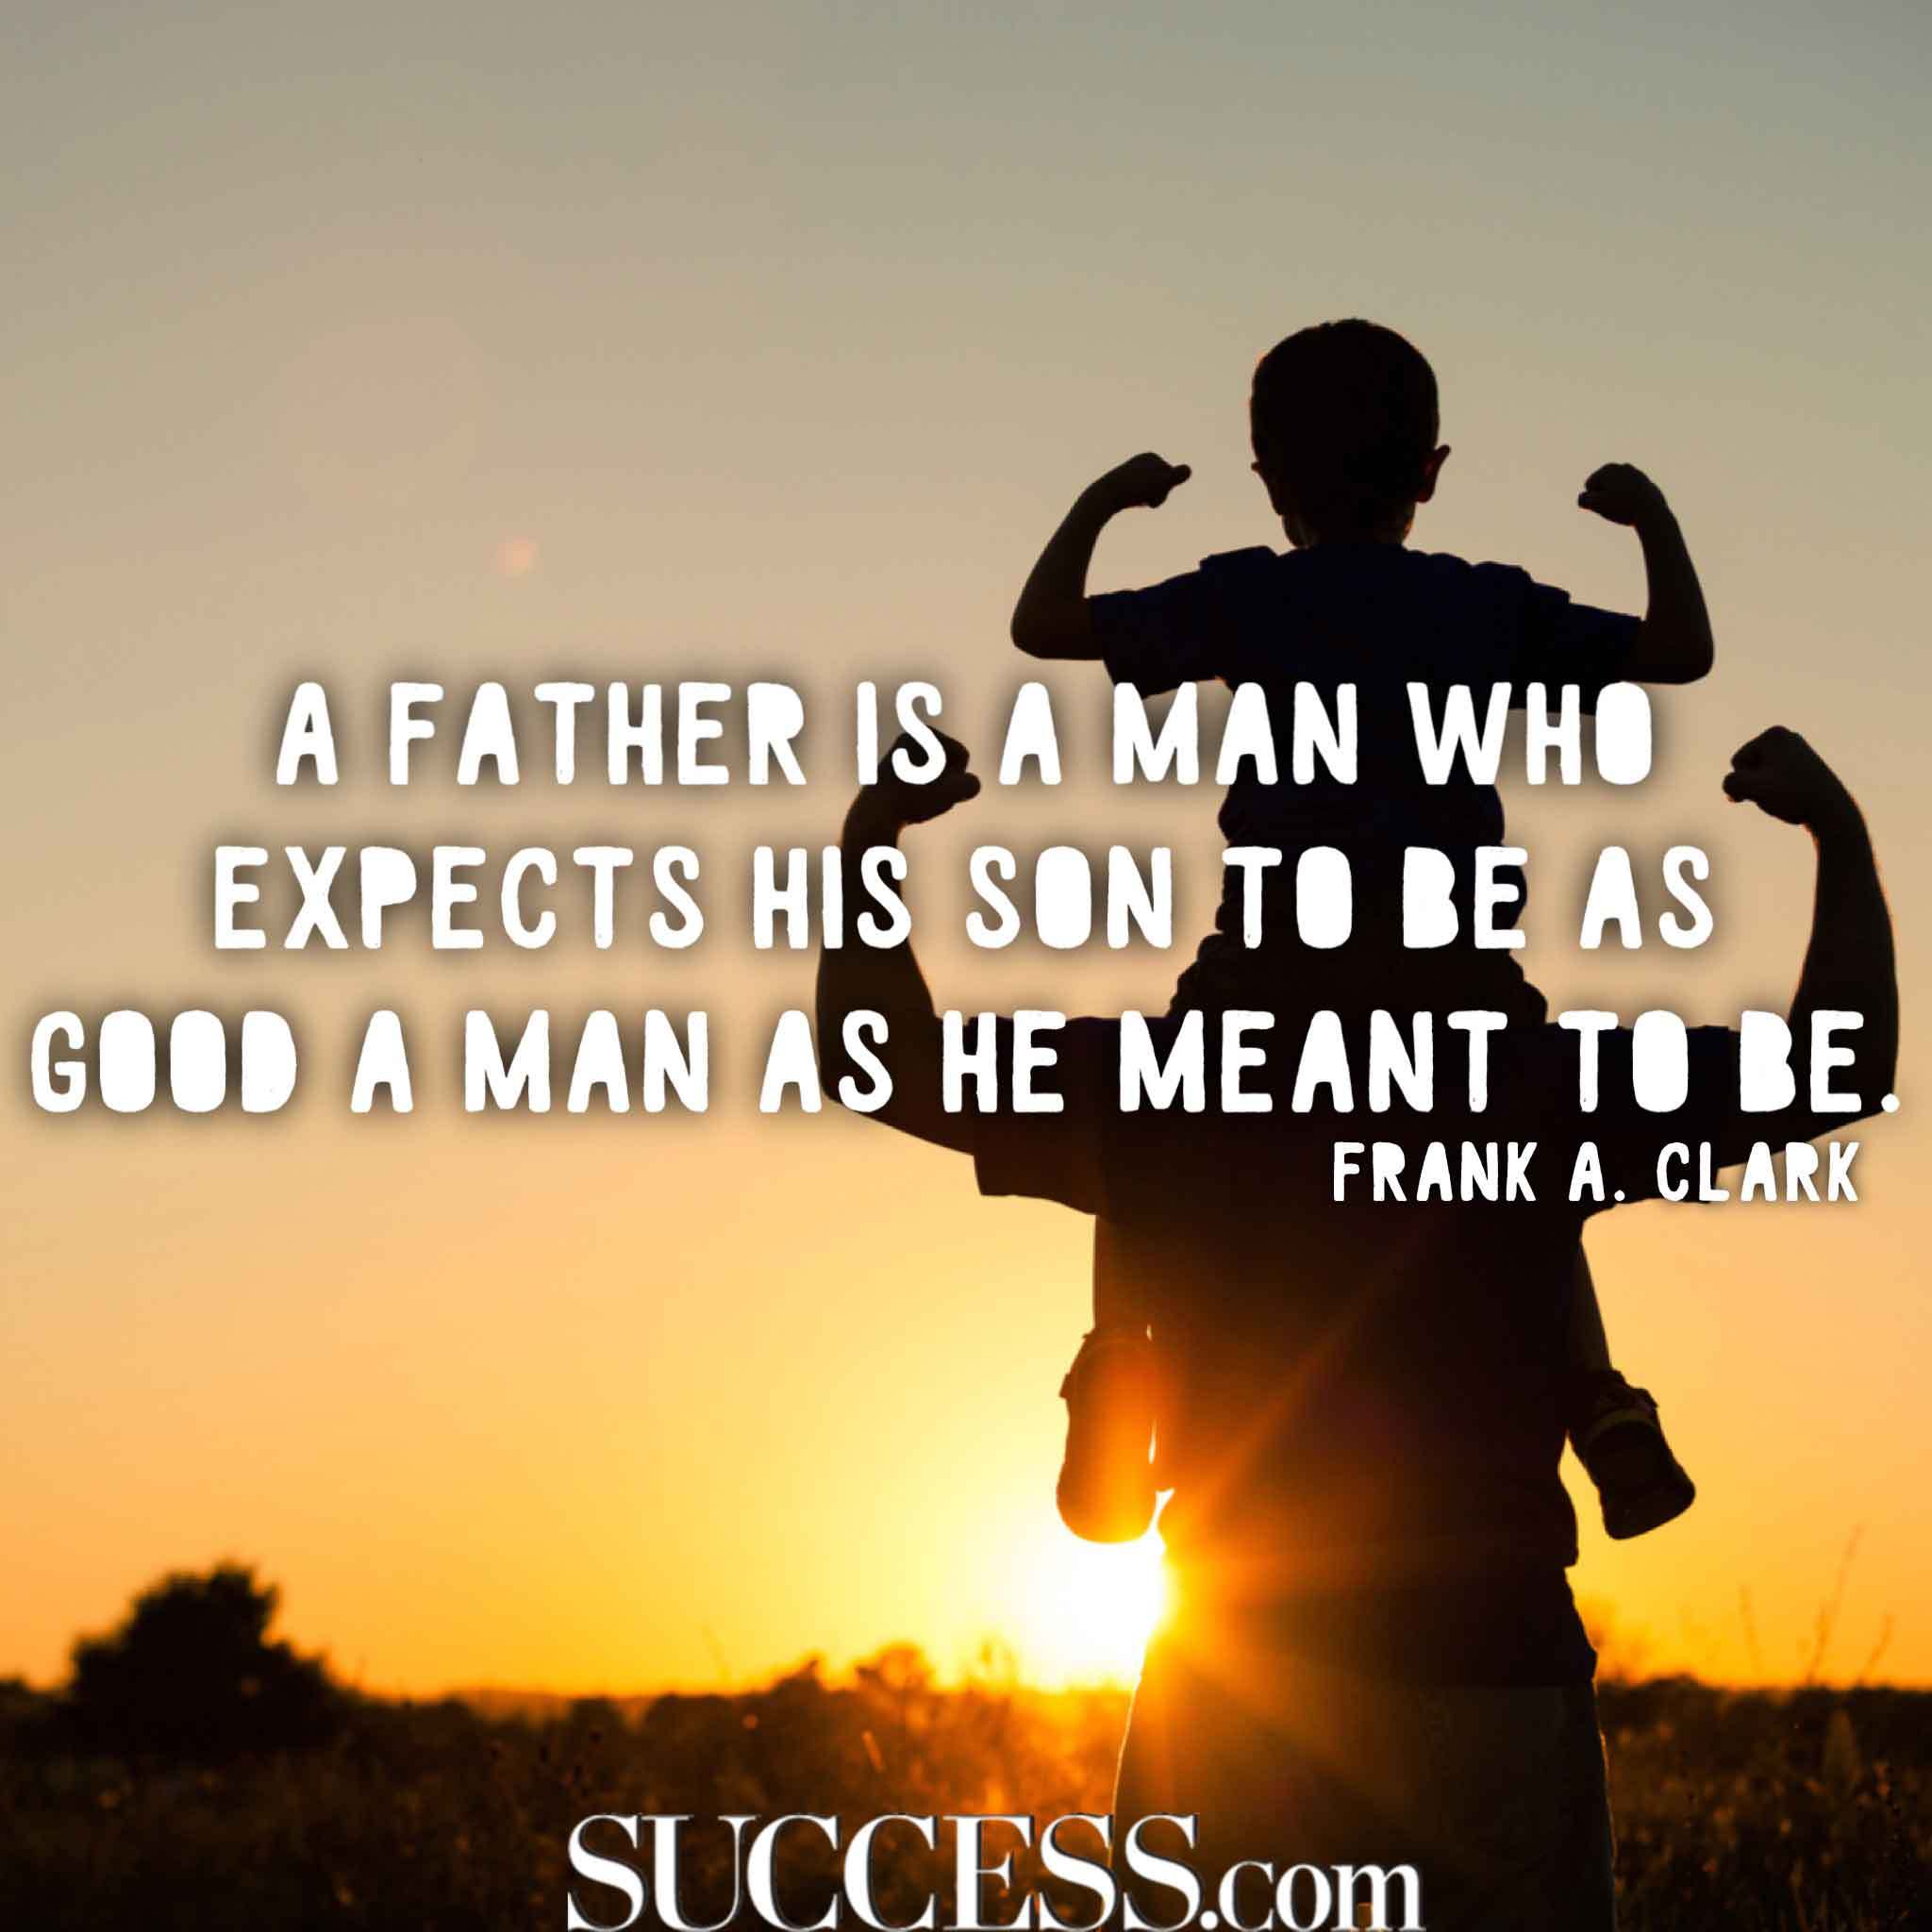 a father is a man who expects his son to be as good a man as he meant to be. frank a. clark